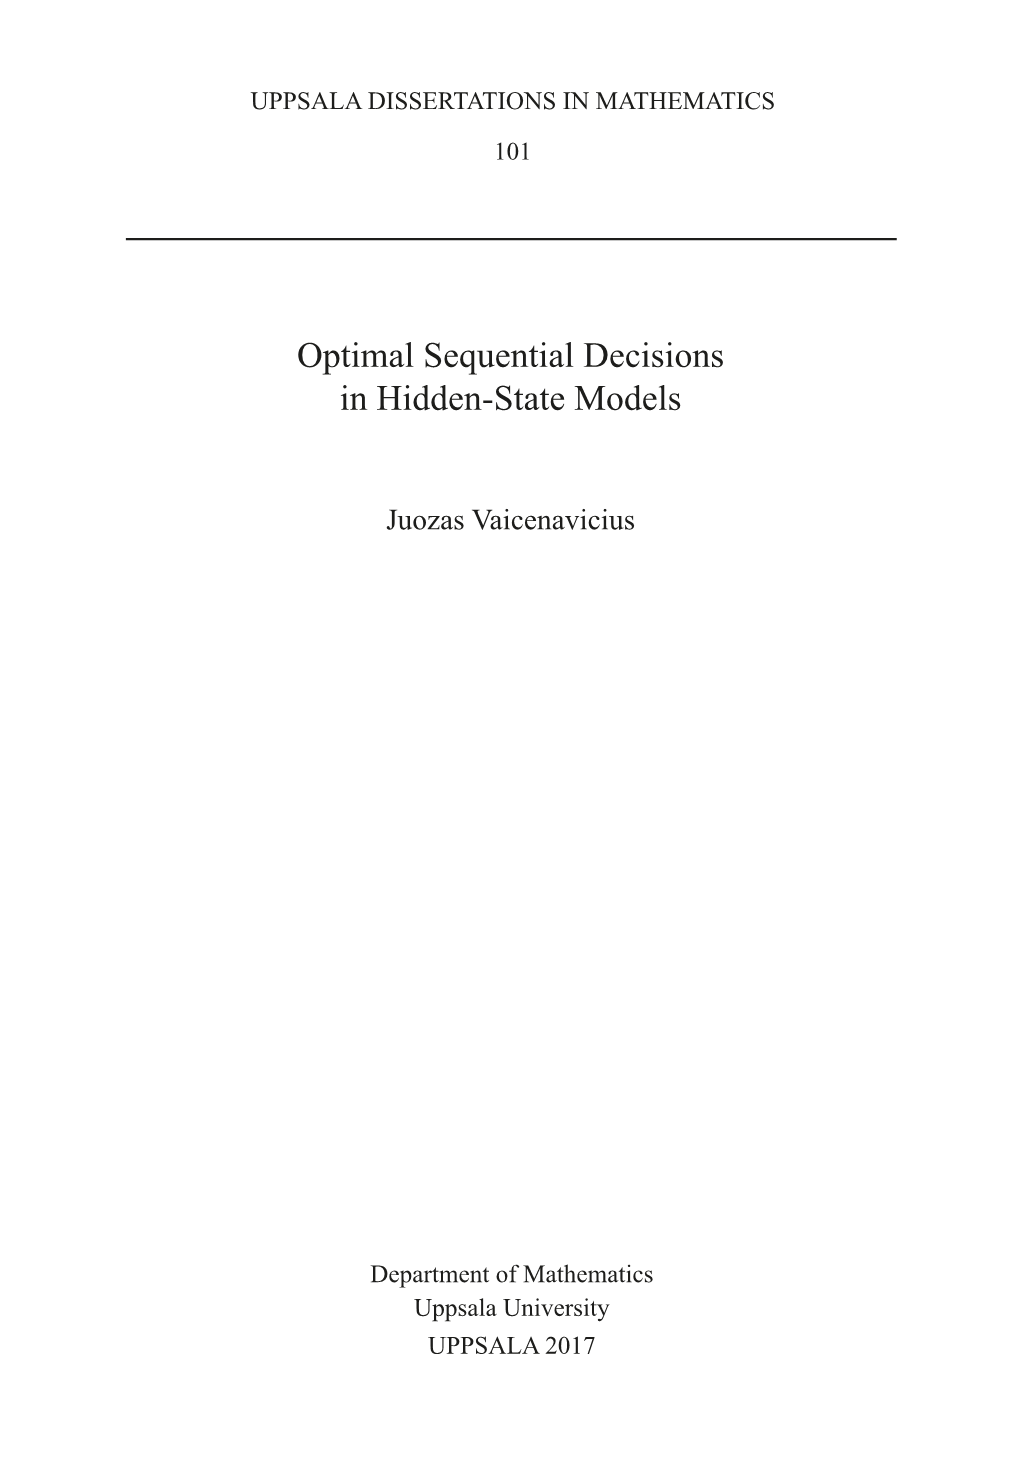 Optimal Sequential Decisions in Hidden-State Models